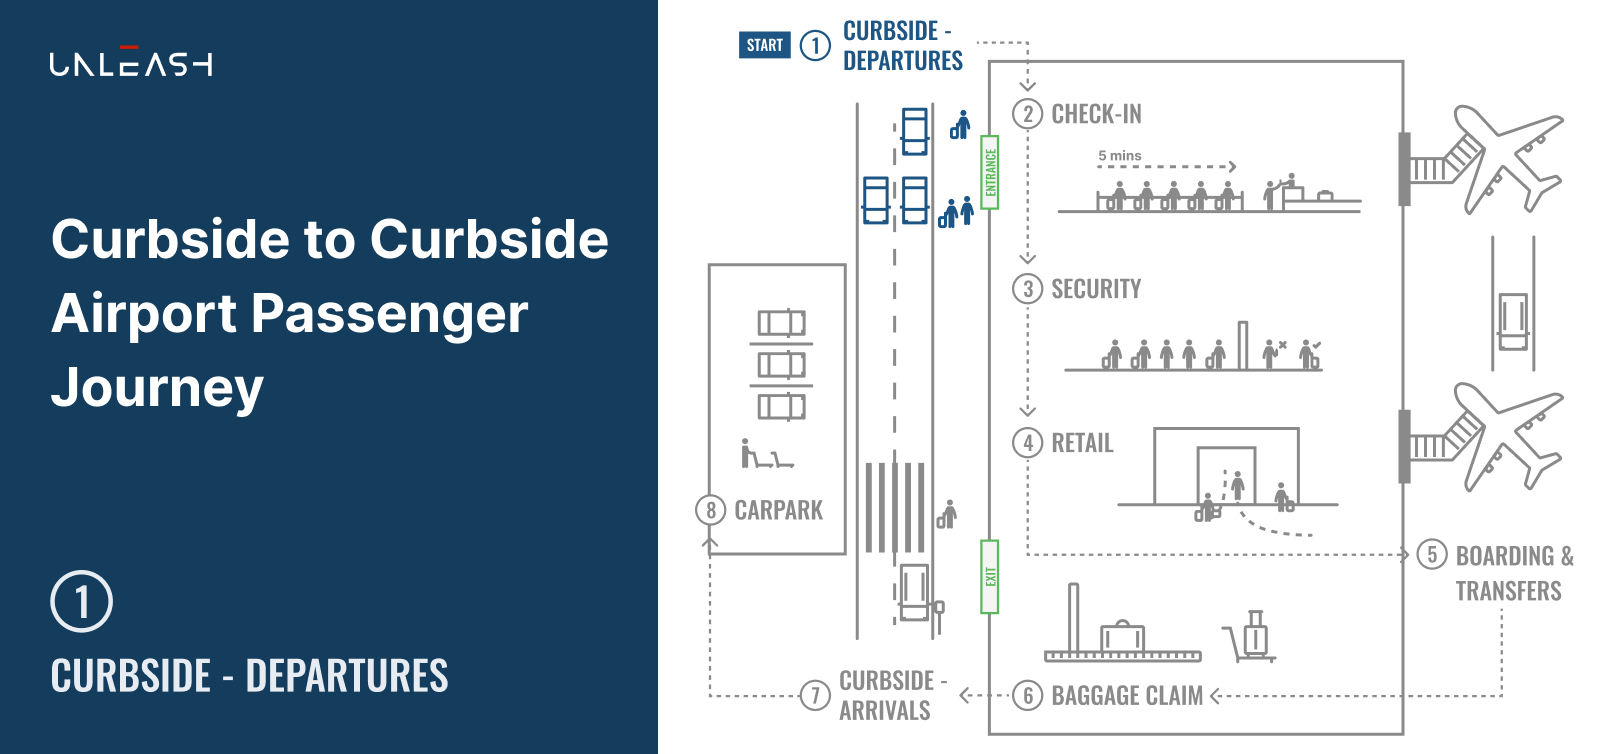 Featured image: Curbside to Curbside Airport Passenger Journey - Part 1 Curbside Departures - Read full post: Computer Vision for Airport Operations Series - Part 1, 'Curbside Departures'